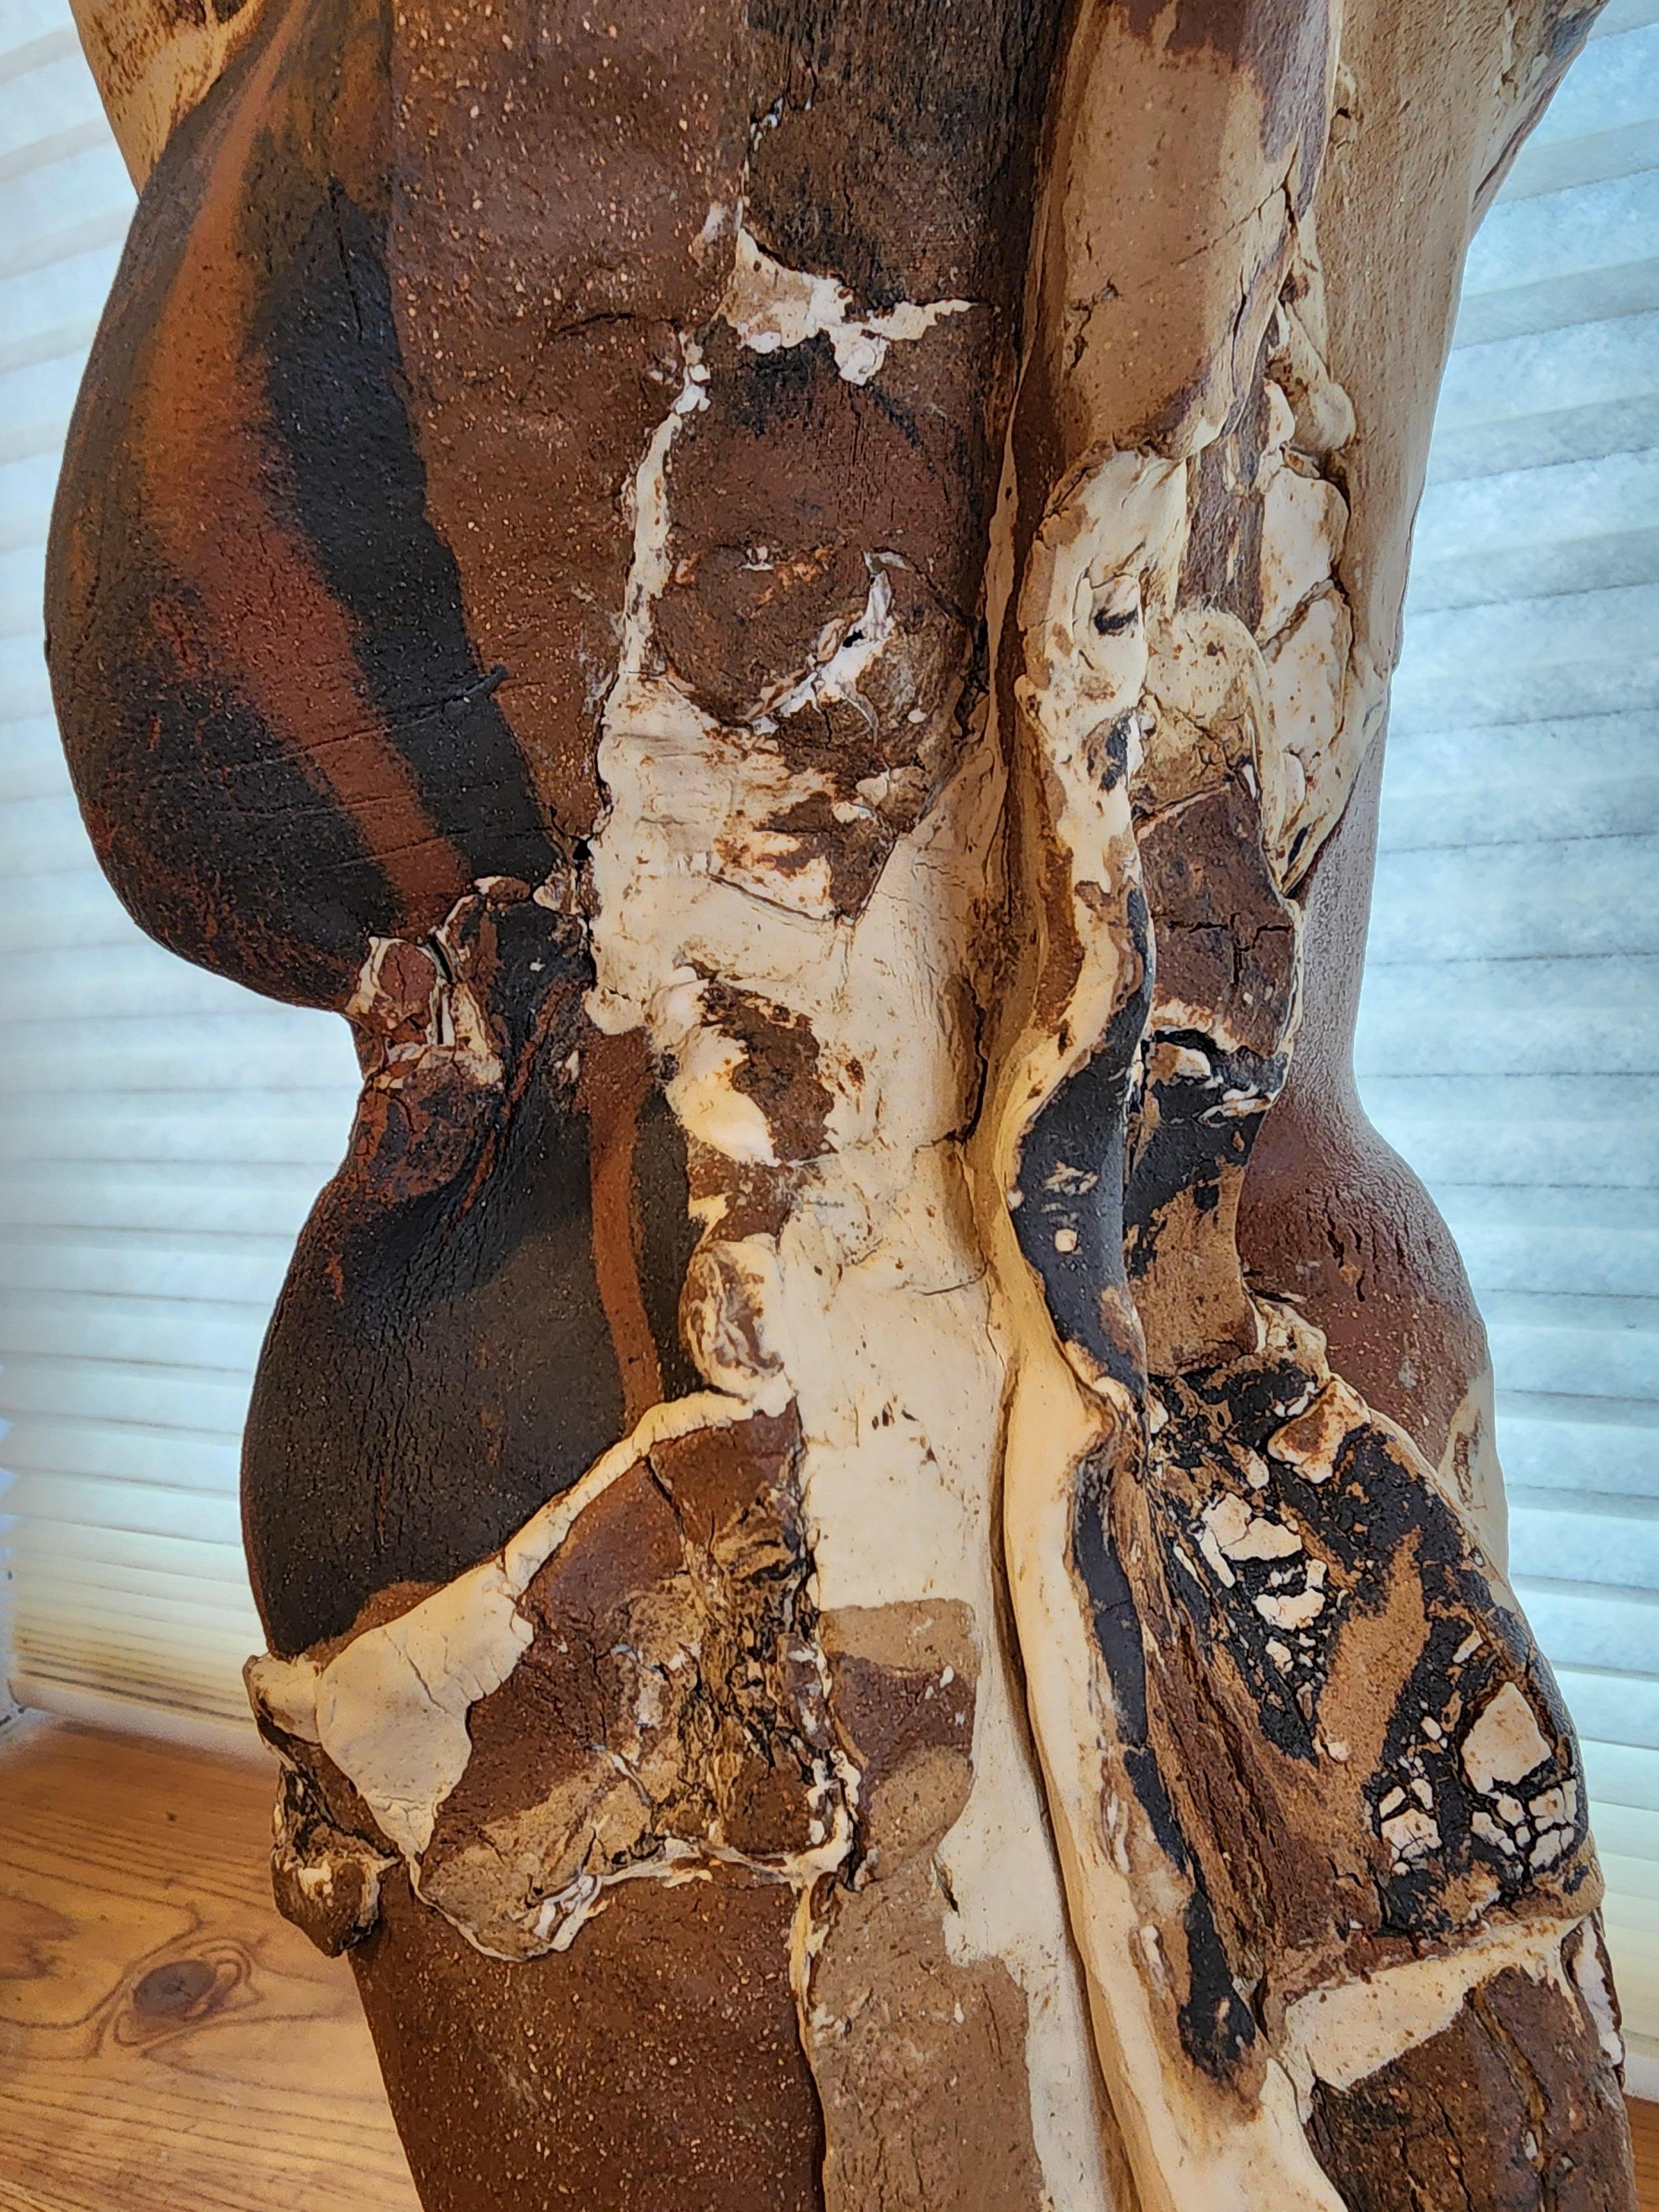 Ceramic sculpture of combined clay bodies, unique processes developed by Anna Bush Crews, looks to inherent qualities in the material, the way it smoothes, or not, the way it stretches or breaks up in actions that make the shapes and form the